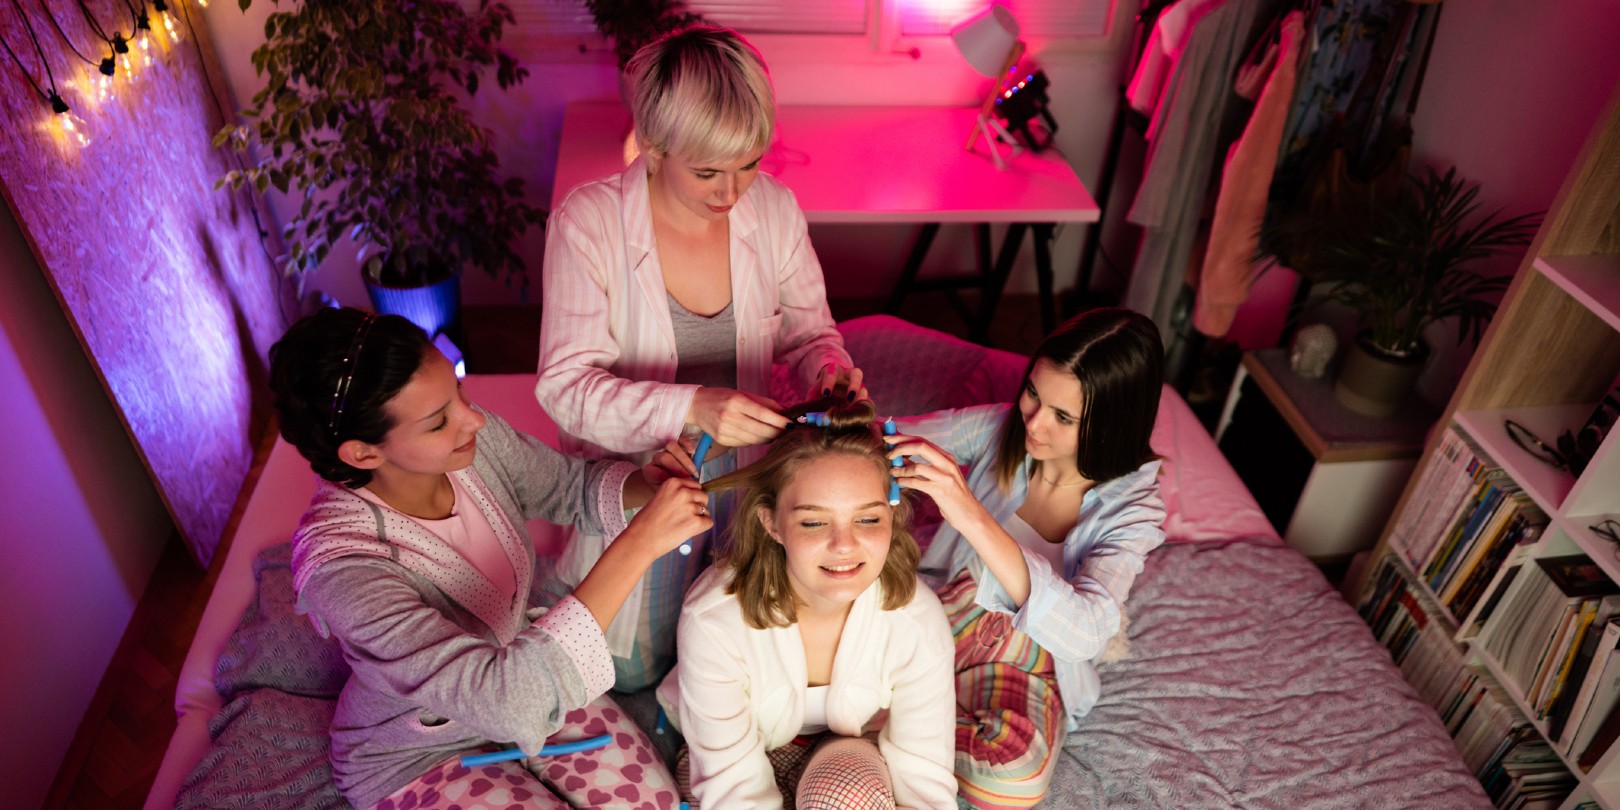 High-angle view of young Caucasian women styling a friend's hair and having fun at a slumber party.